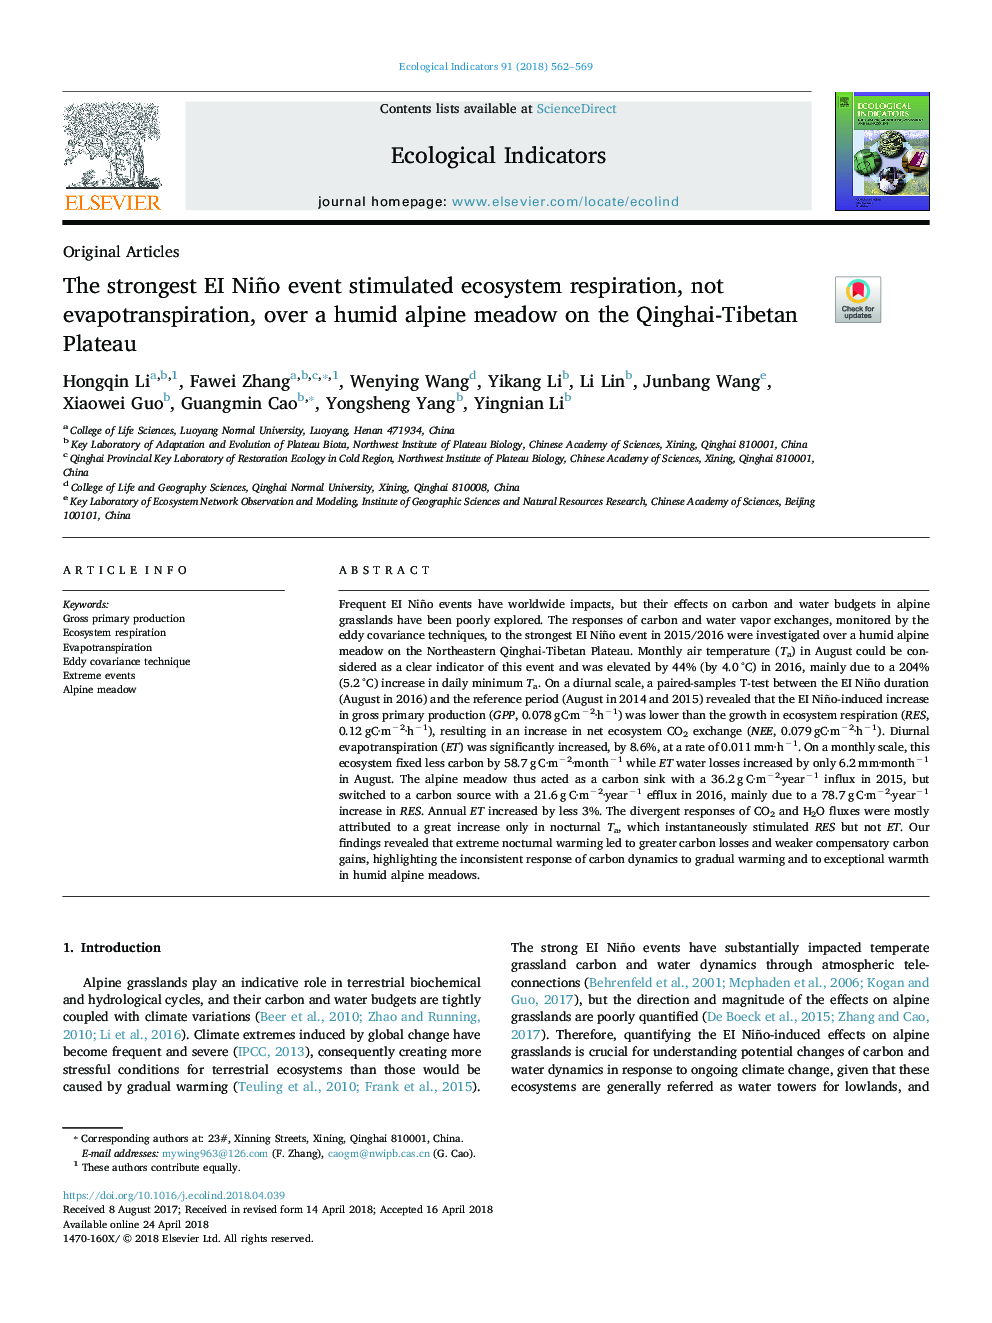 The strongest EI Niño event stimulated ecosystem respiration, not evapotranspiration, over a humid alpine meadow on the Qinghai-Tibetan Plateau